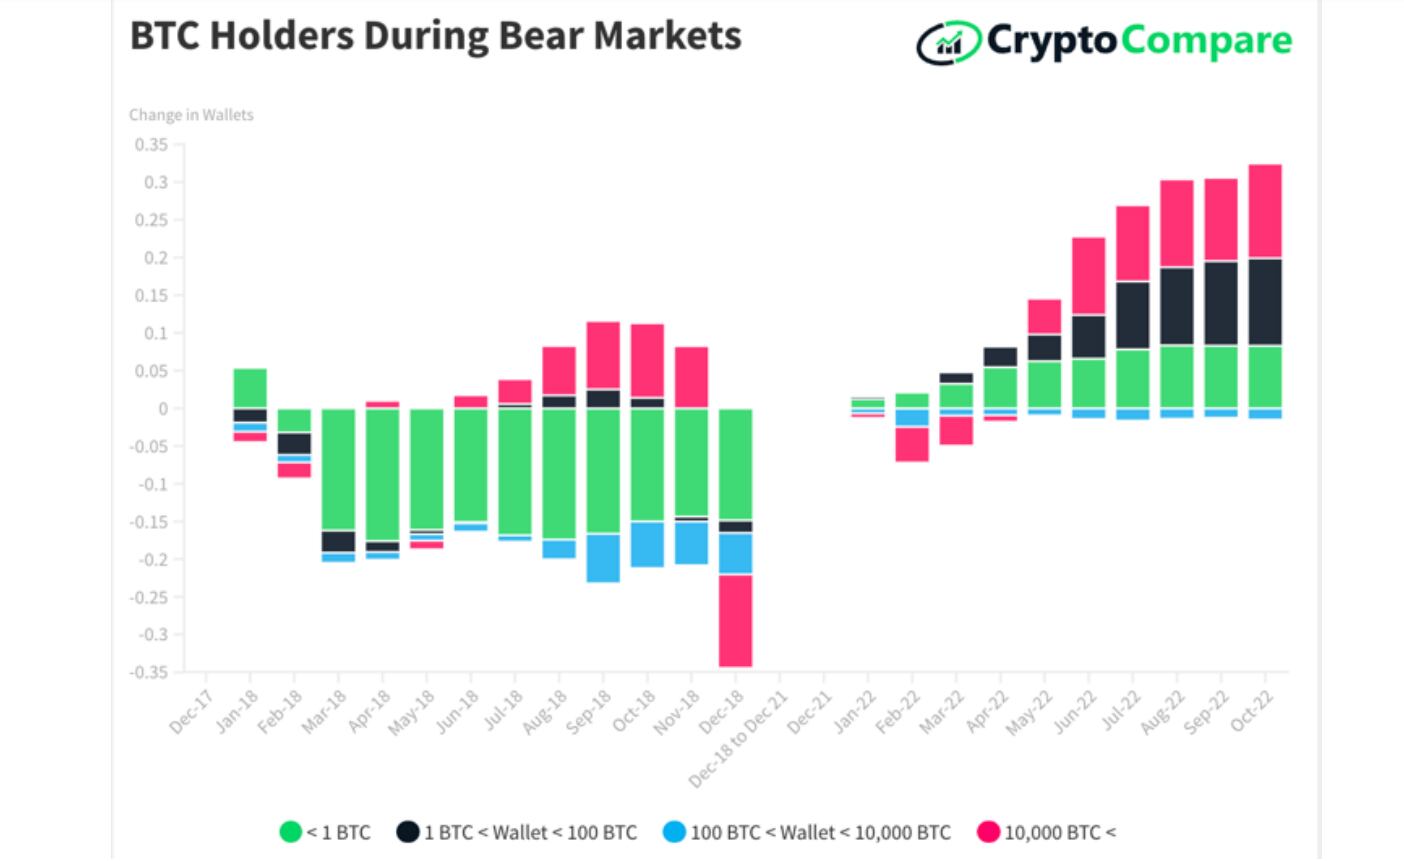 The State of Crypto Gaming in the Bear Market